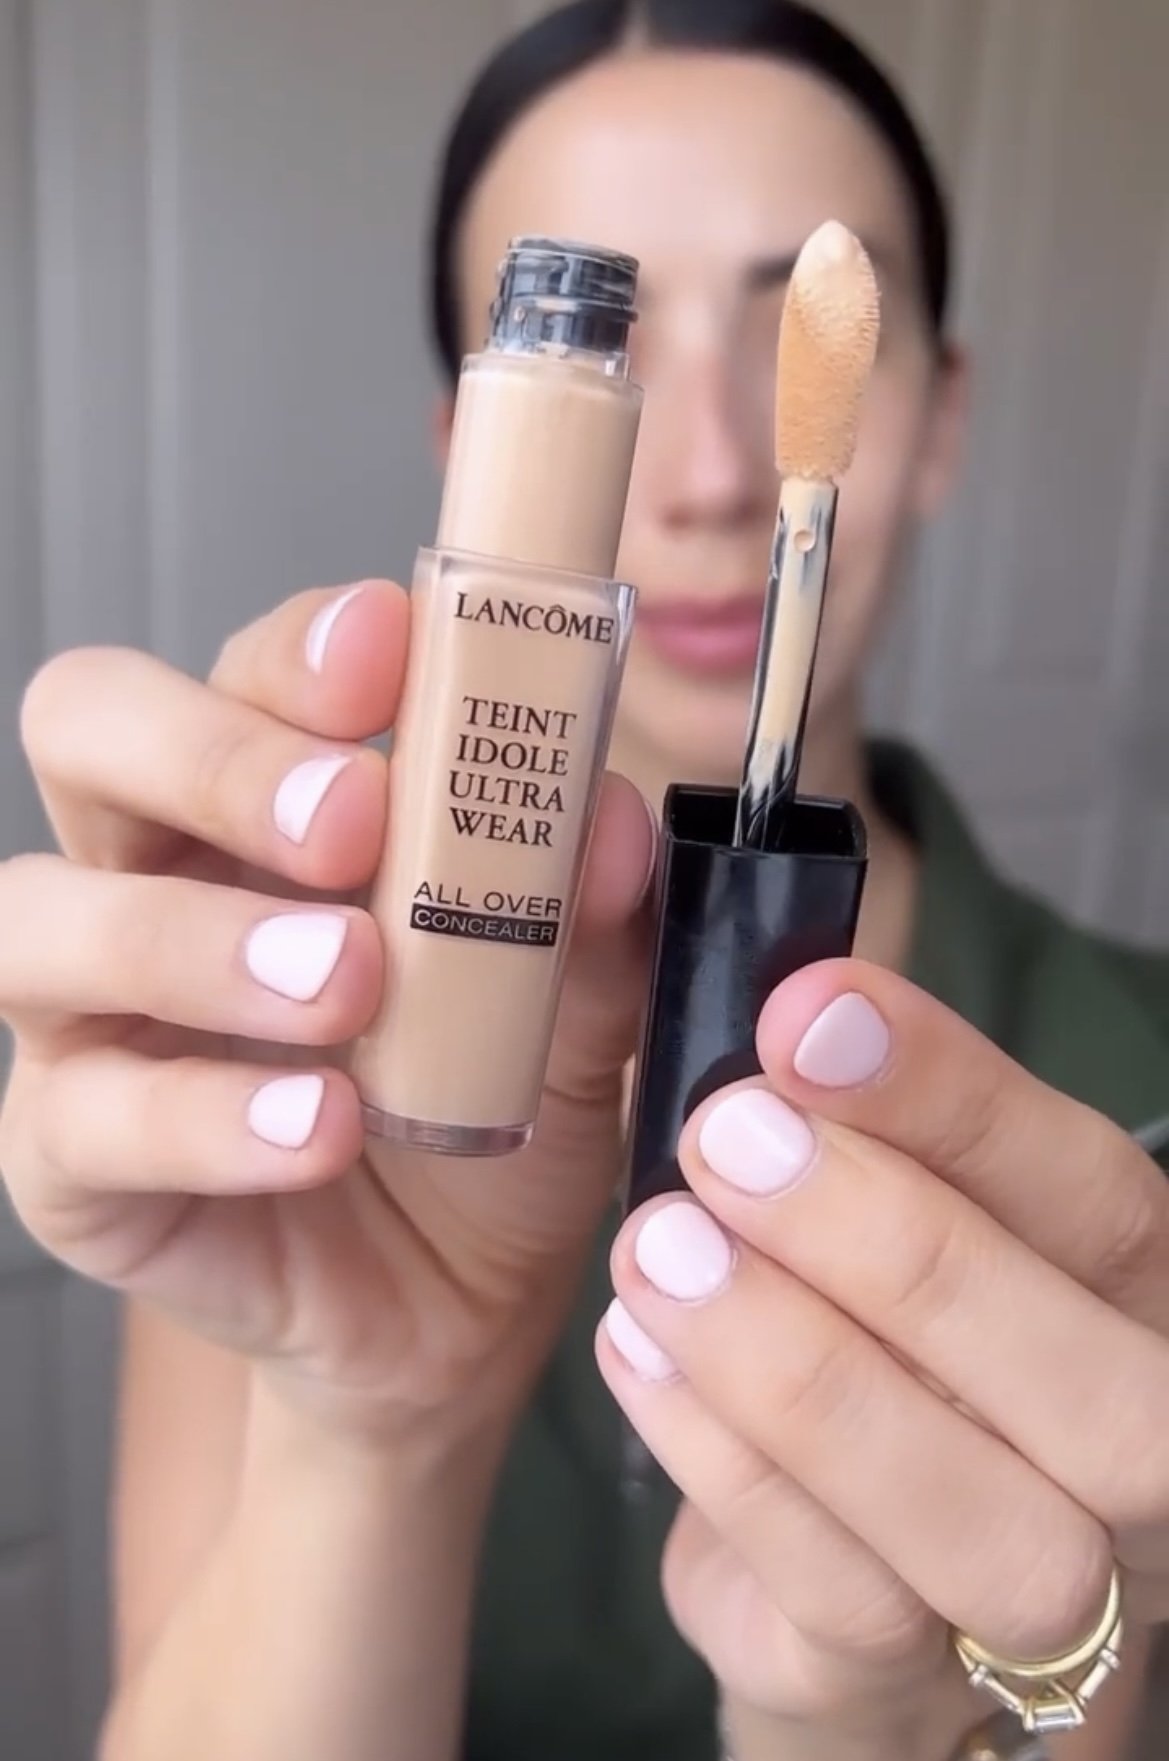 HOW TO CHOOSE A CONCEALER